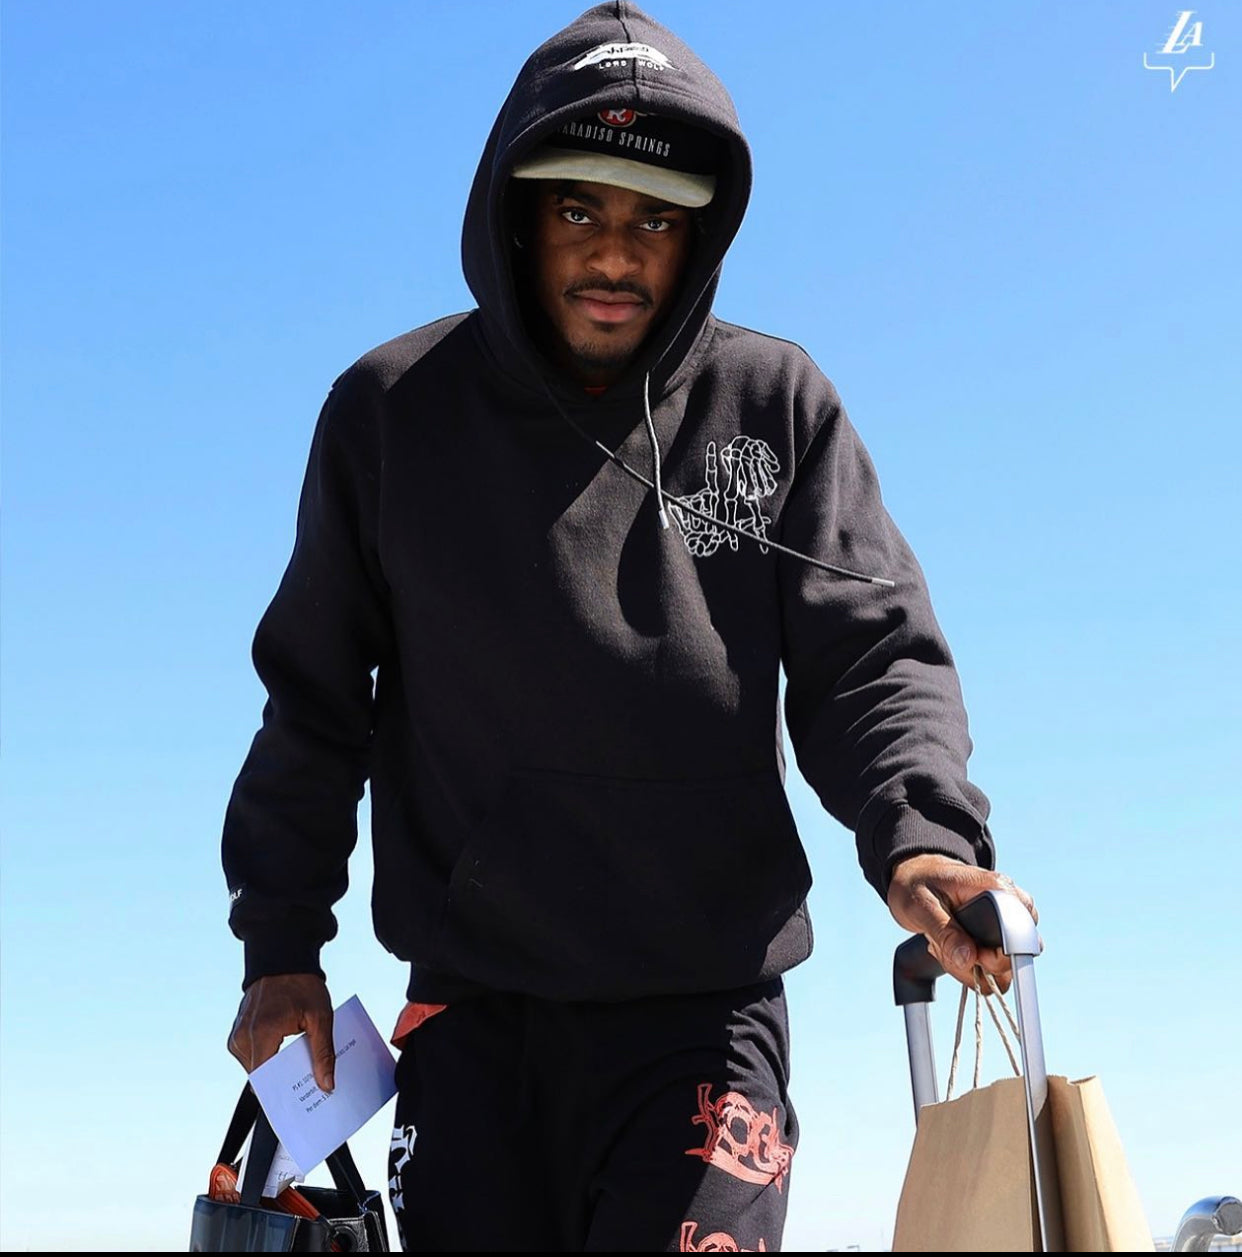 Limited Edition Los Angeles Embroidered Hoodie - Black